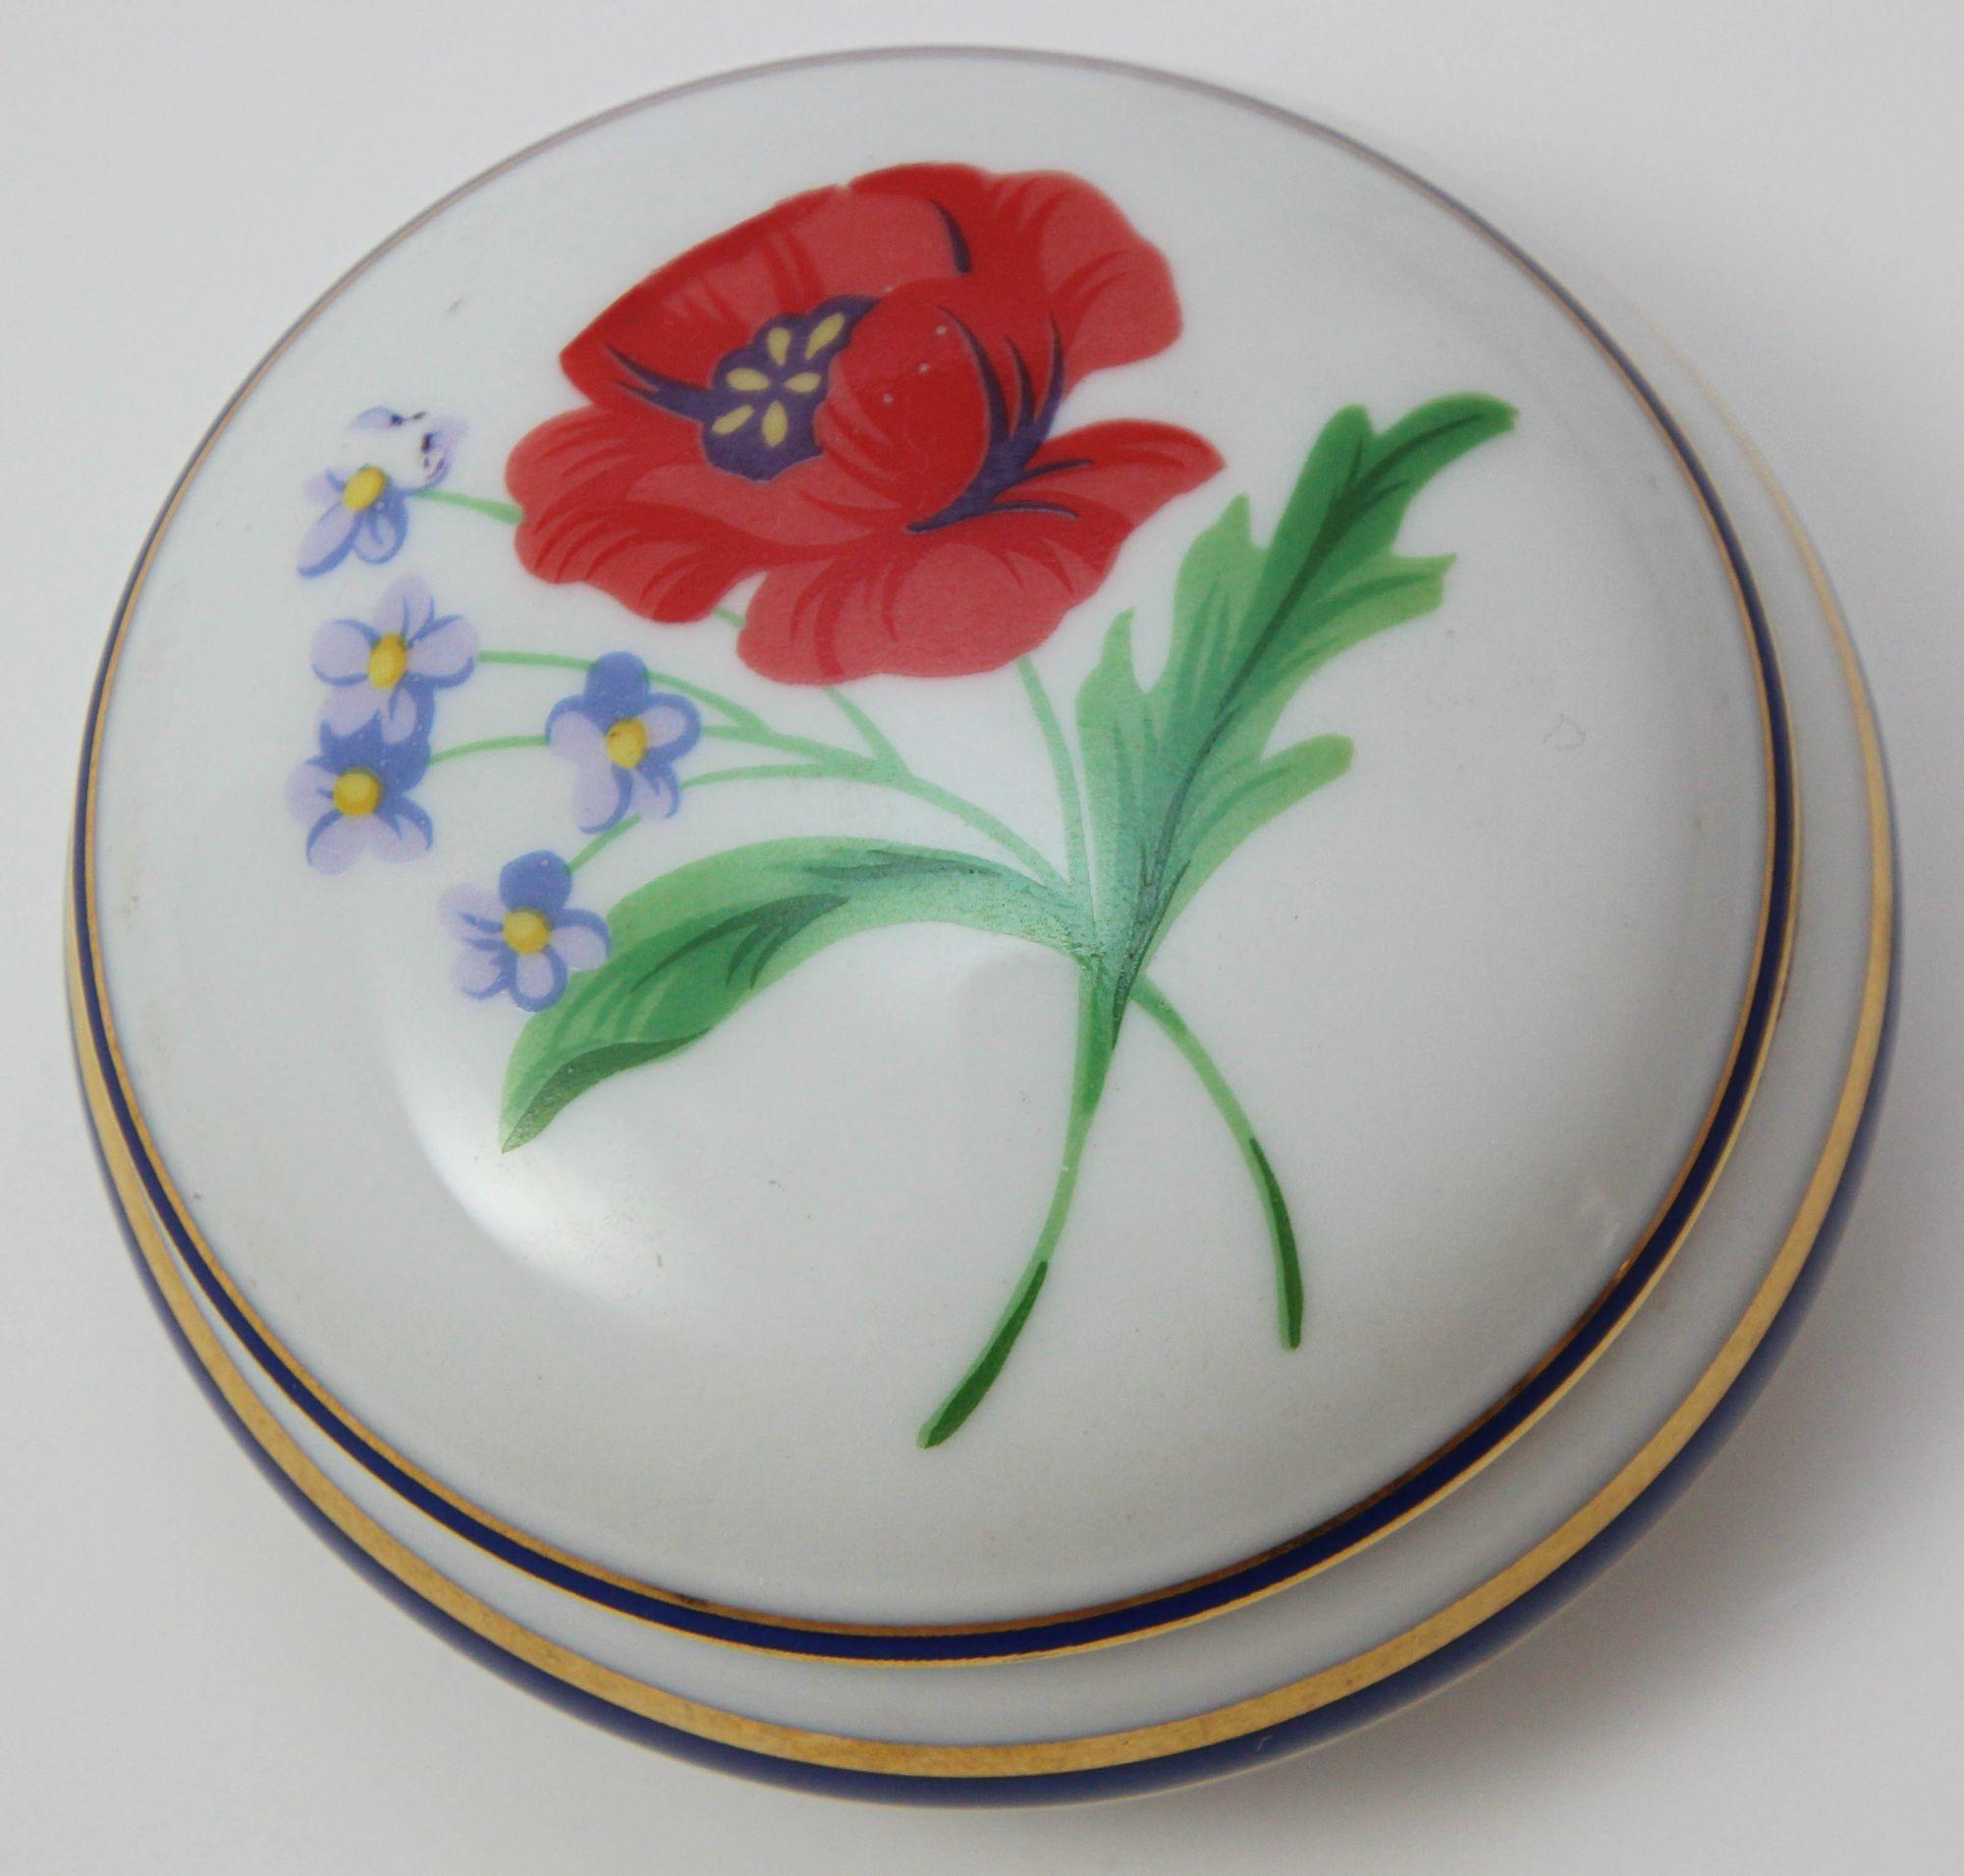 Tiffany & Co. Limoges France American Garden Round Porcelain Collectible Box 2